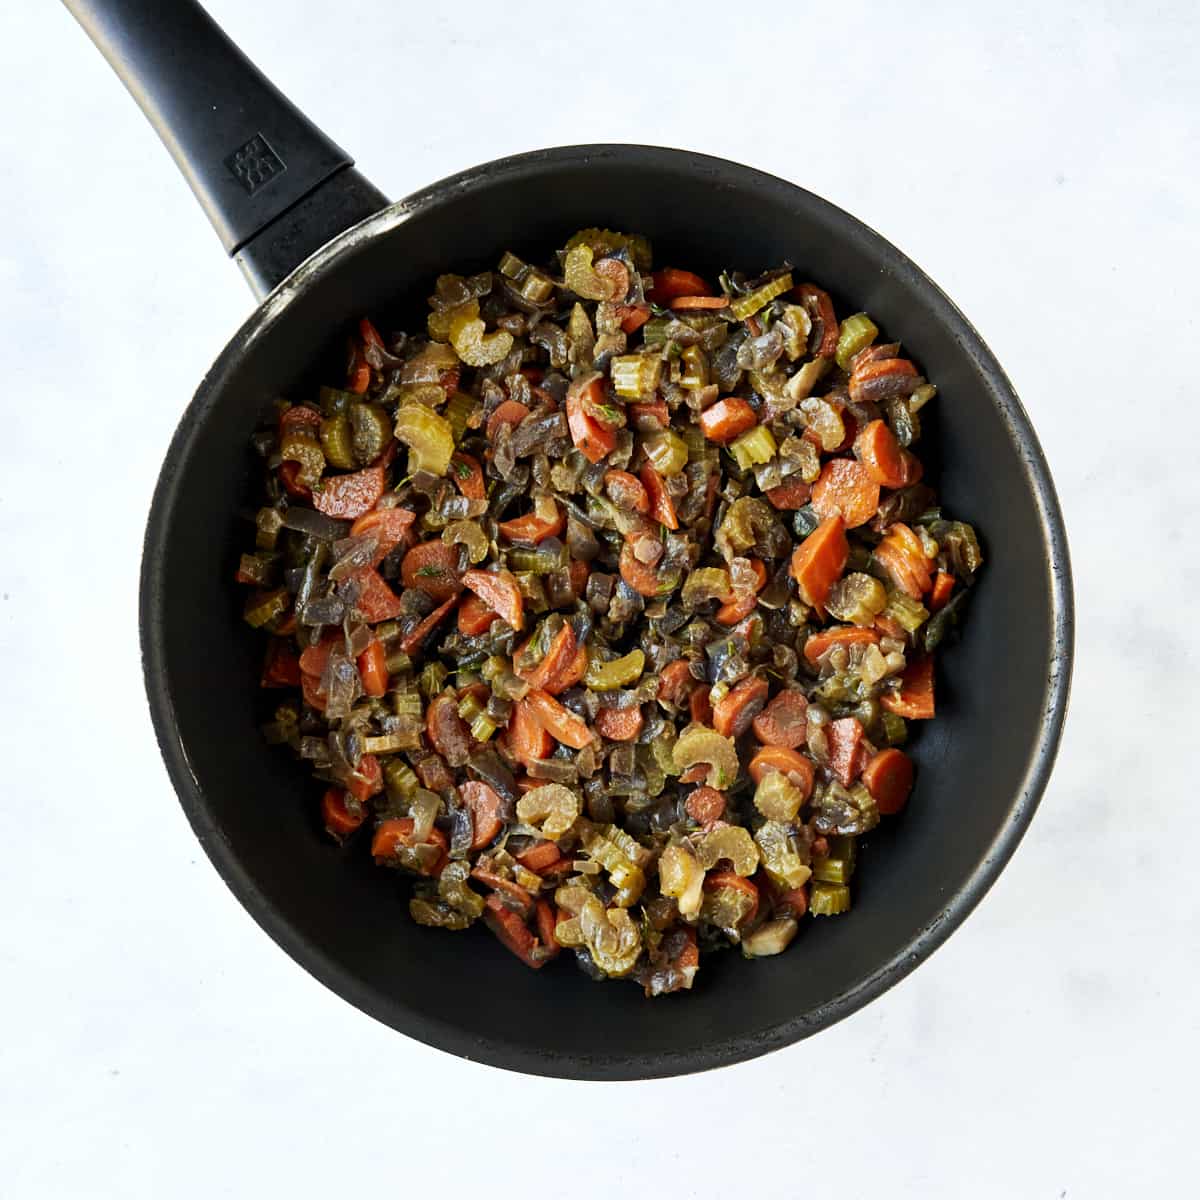 Sautéed veggies in a skillet and a mixing bowl full of Mediterranean-style dressing ingredients. 